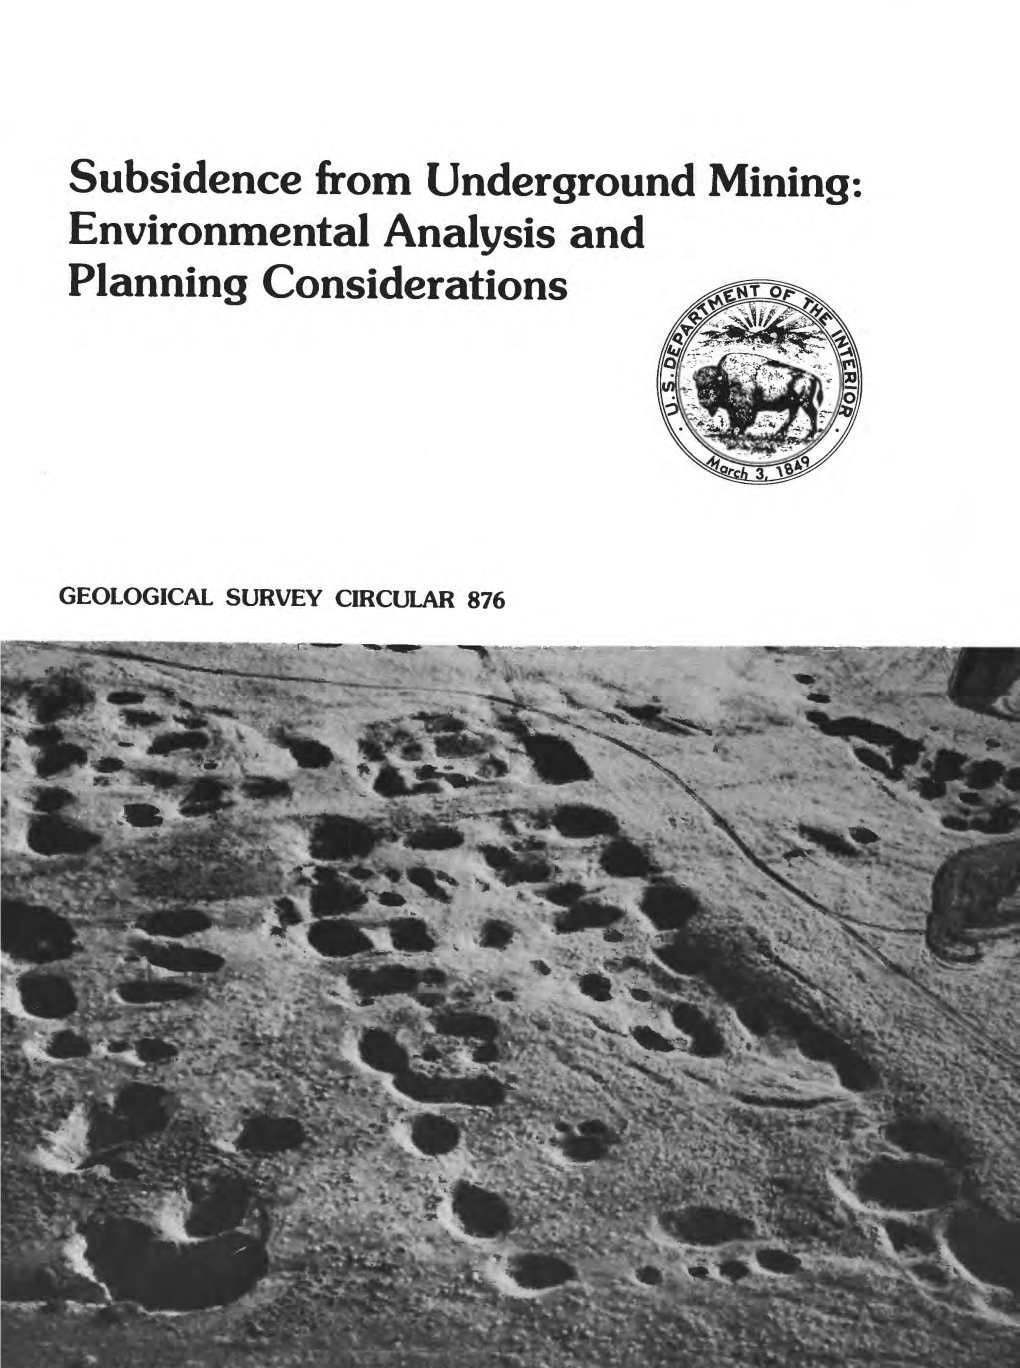 Subsidence from Underground Mining: Environmental Analysis and Planning Considerations